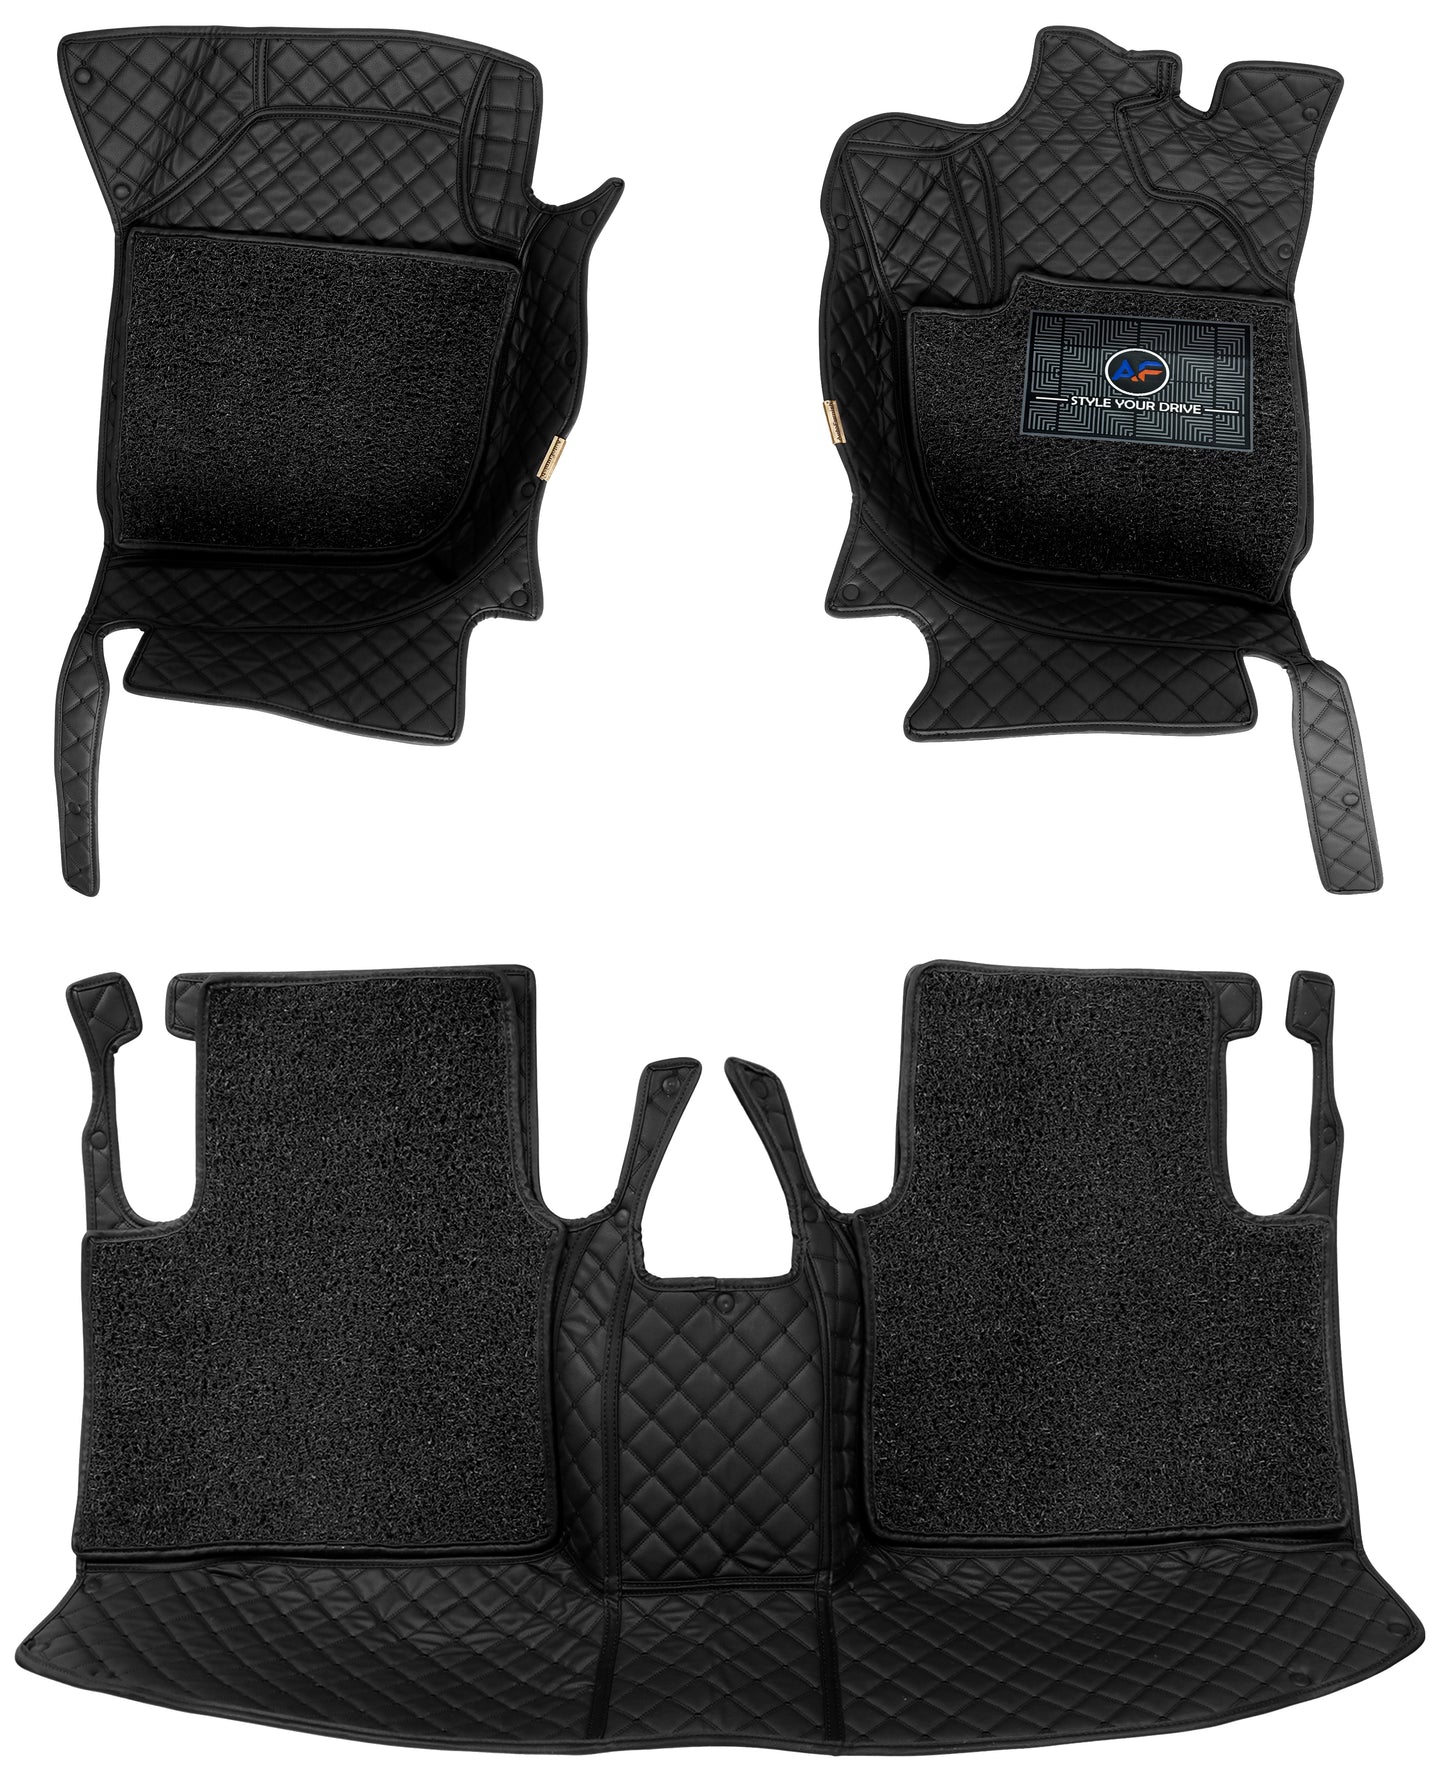 Mahindra Scorpio Classic 2023-7D Luxury Car Mat, All Weather Proof, Anti-Skid, 100% Waterproof & Odorless with Unique Diamond Fish Design (24mm Luxury PU Leather, 2 Rows)